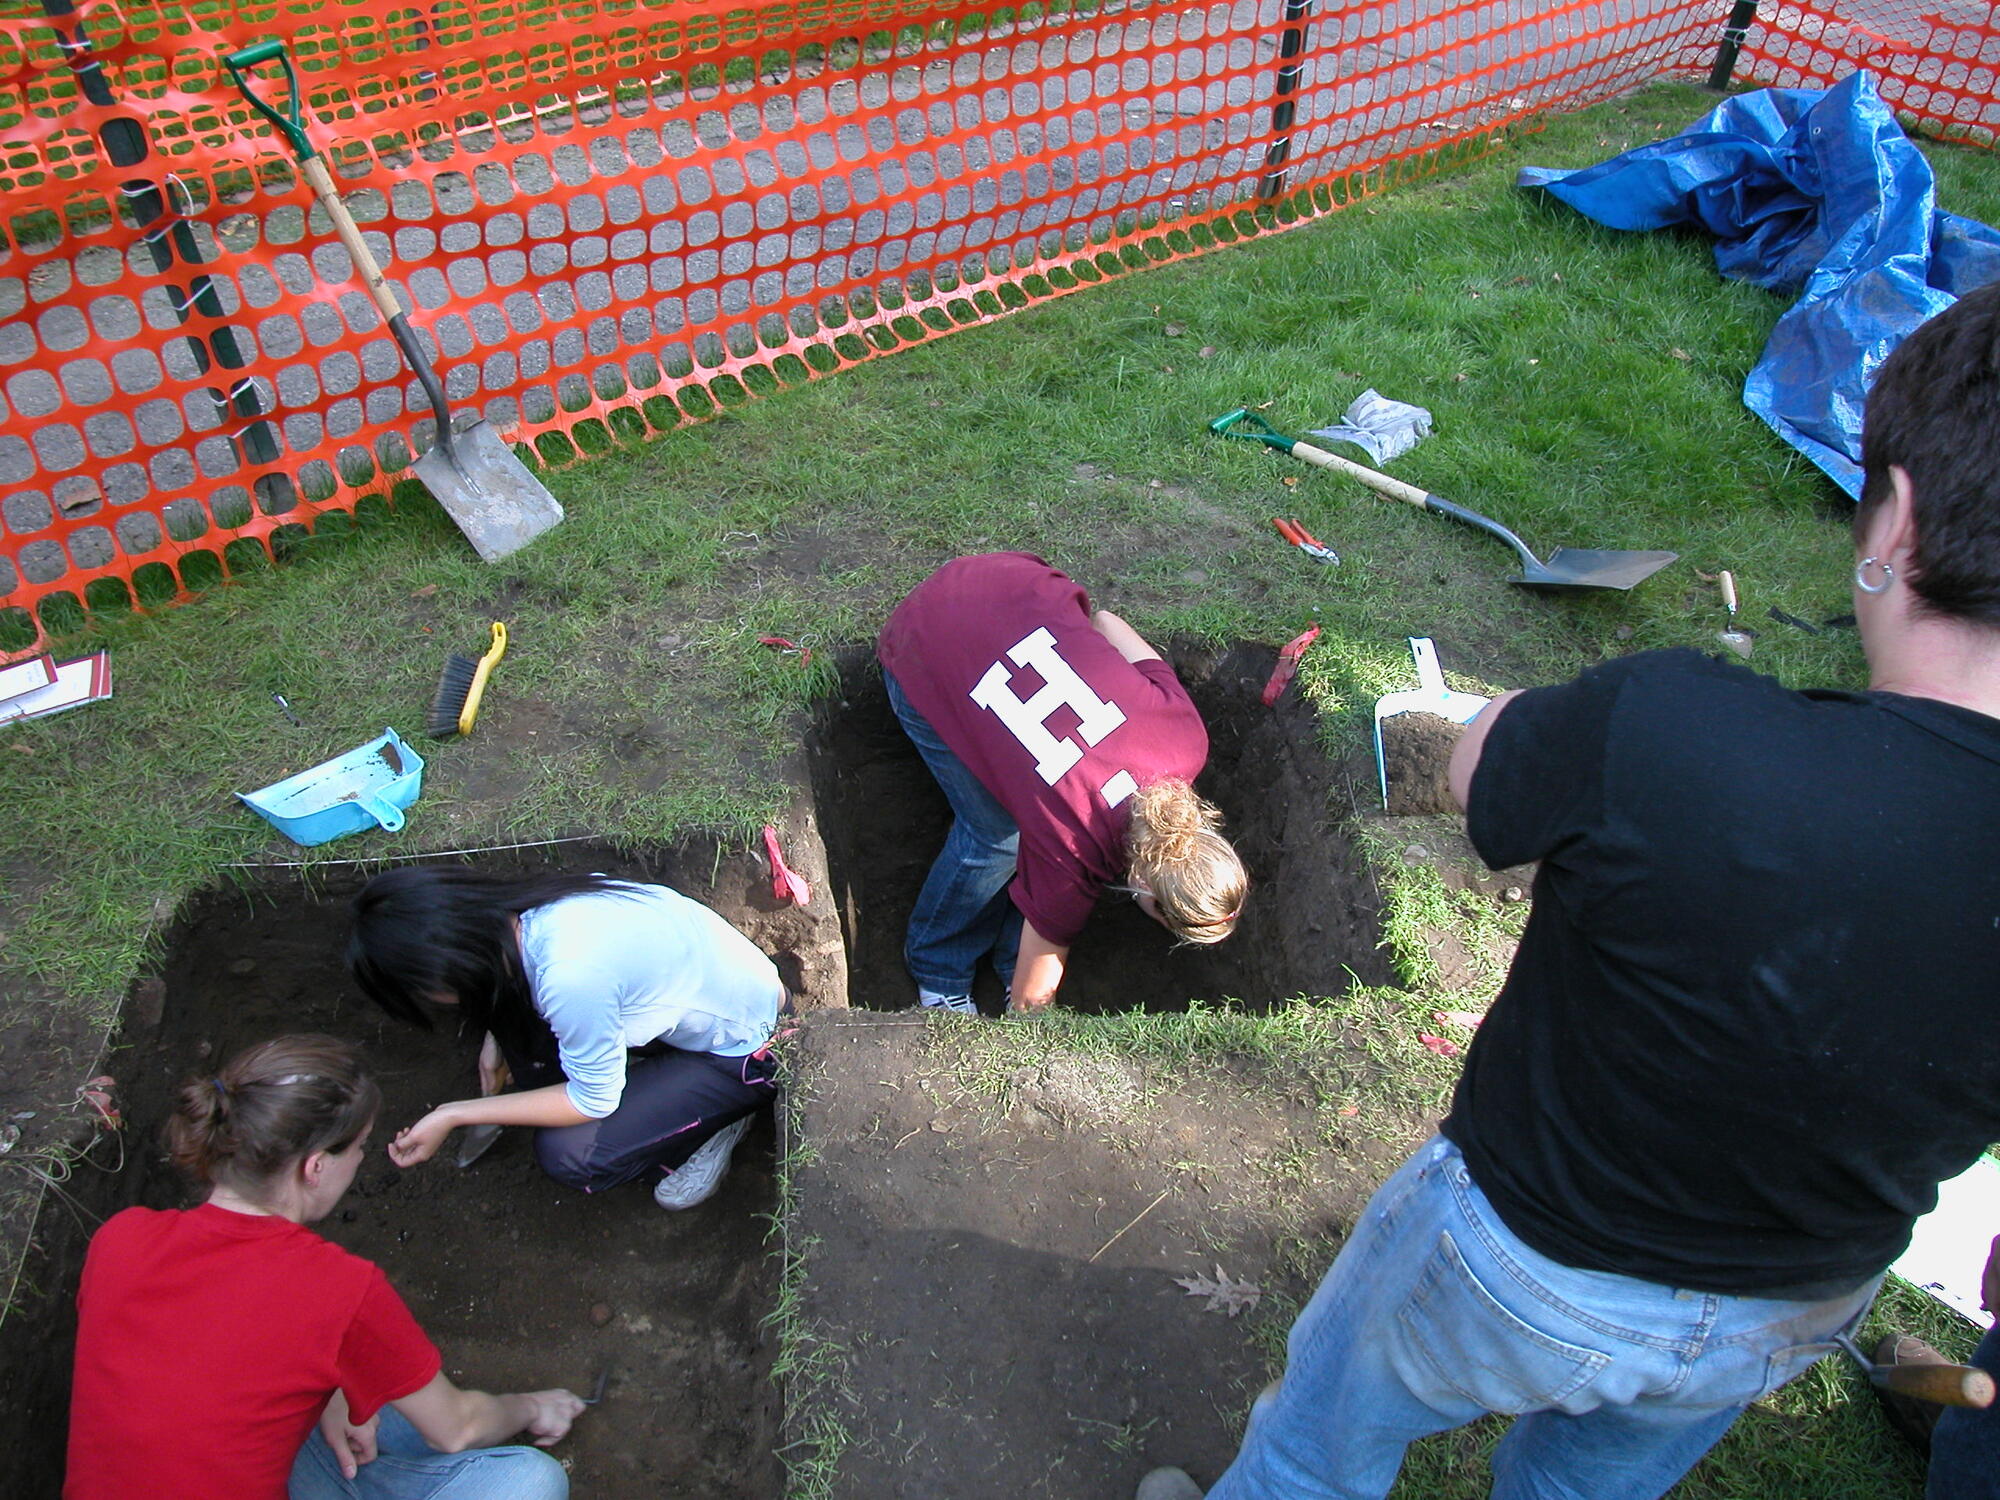 Harvard students doing in the archaeological dig in Harvard Yard.